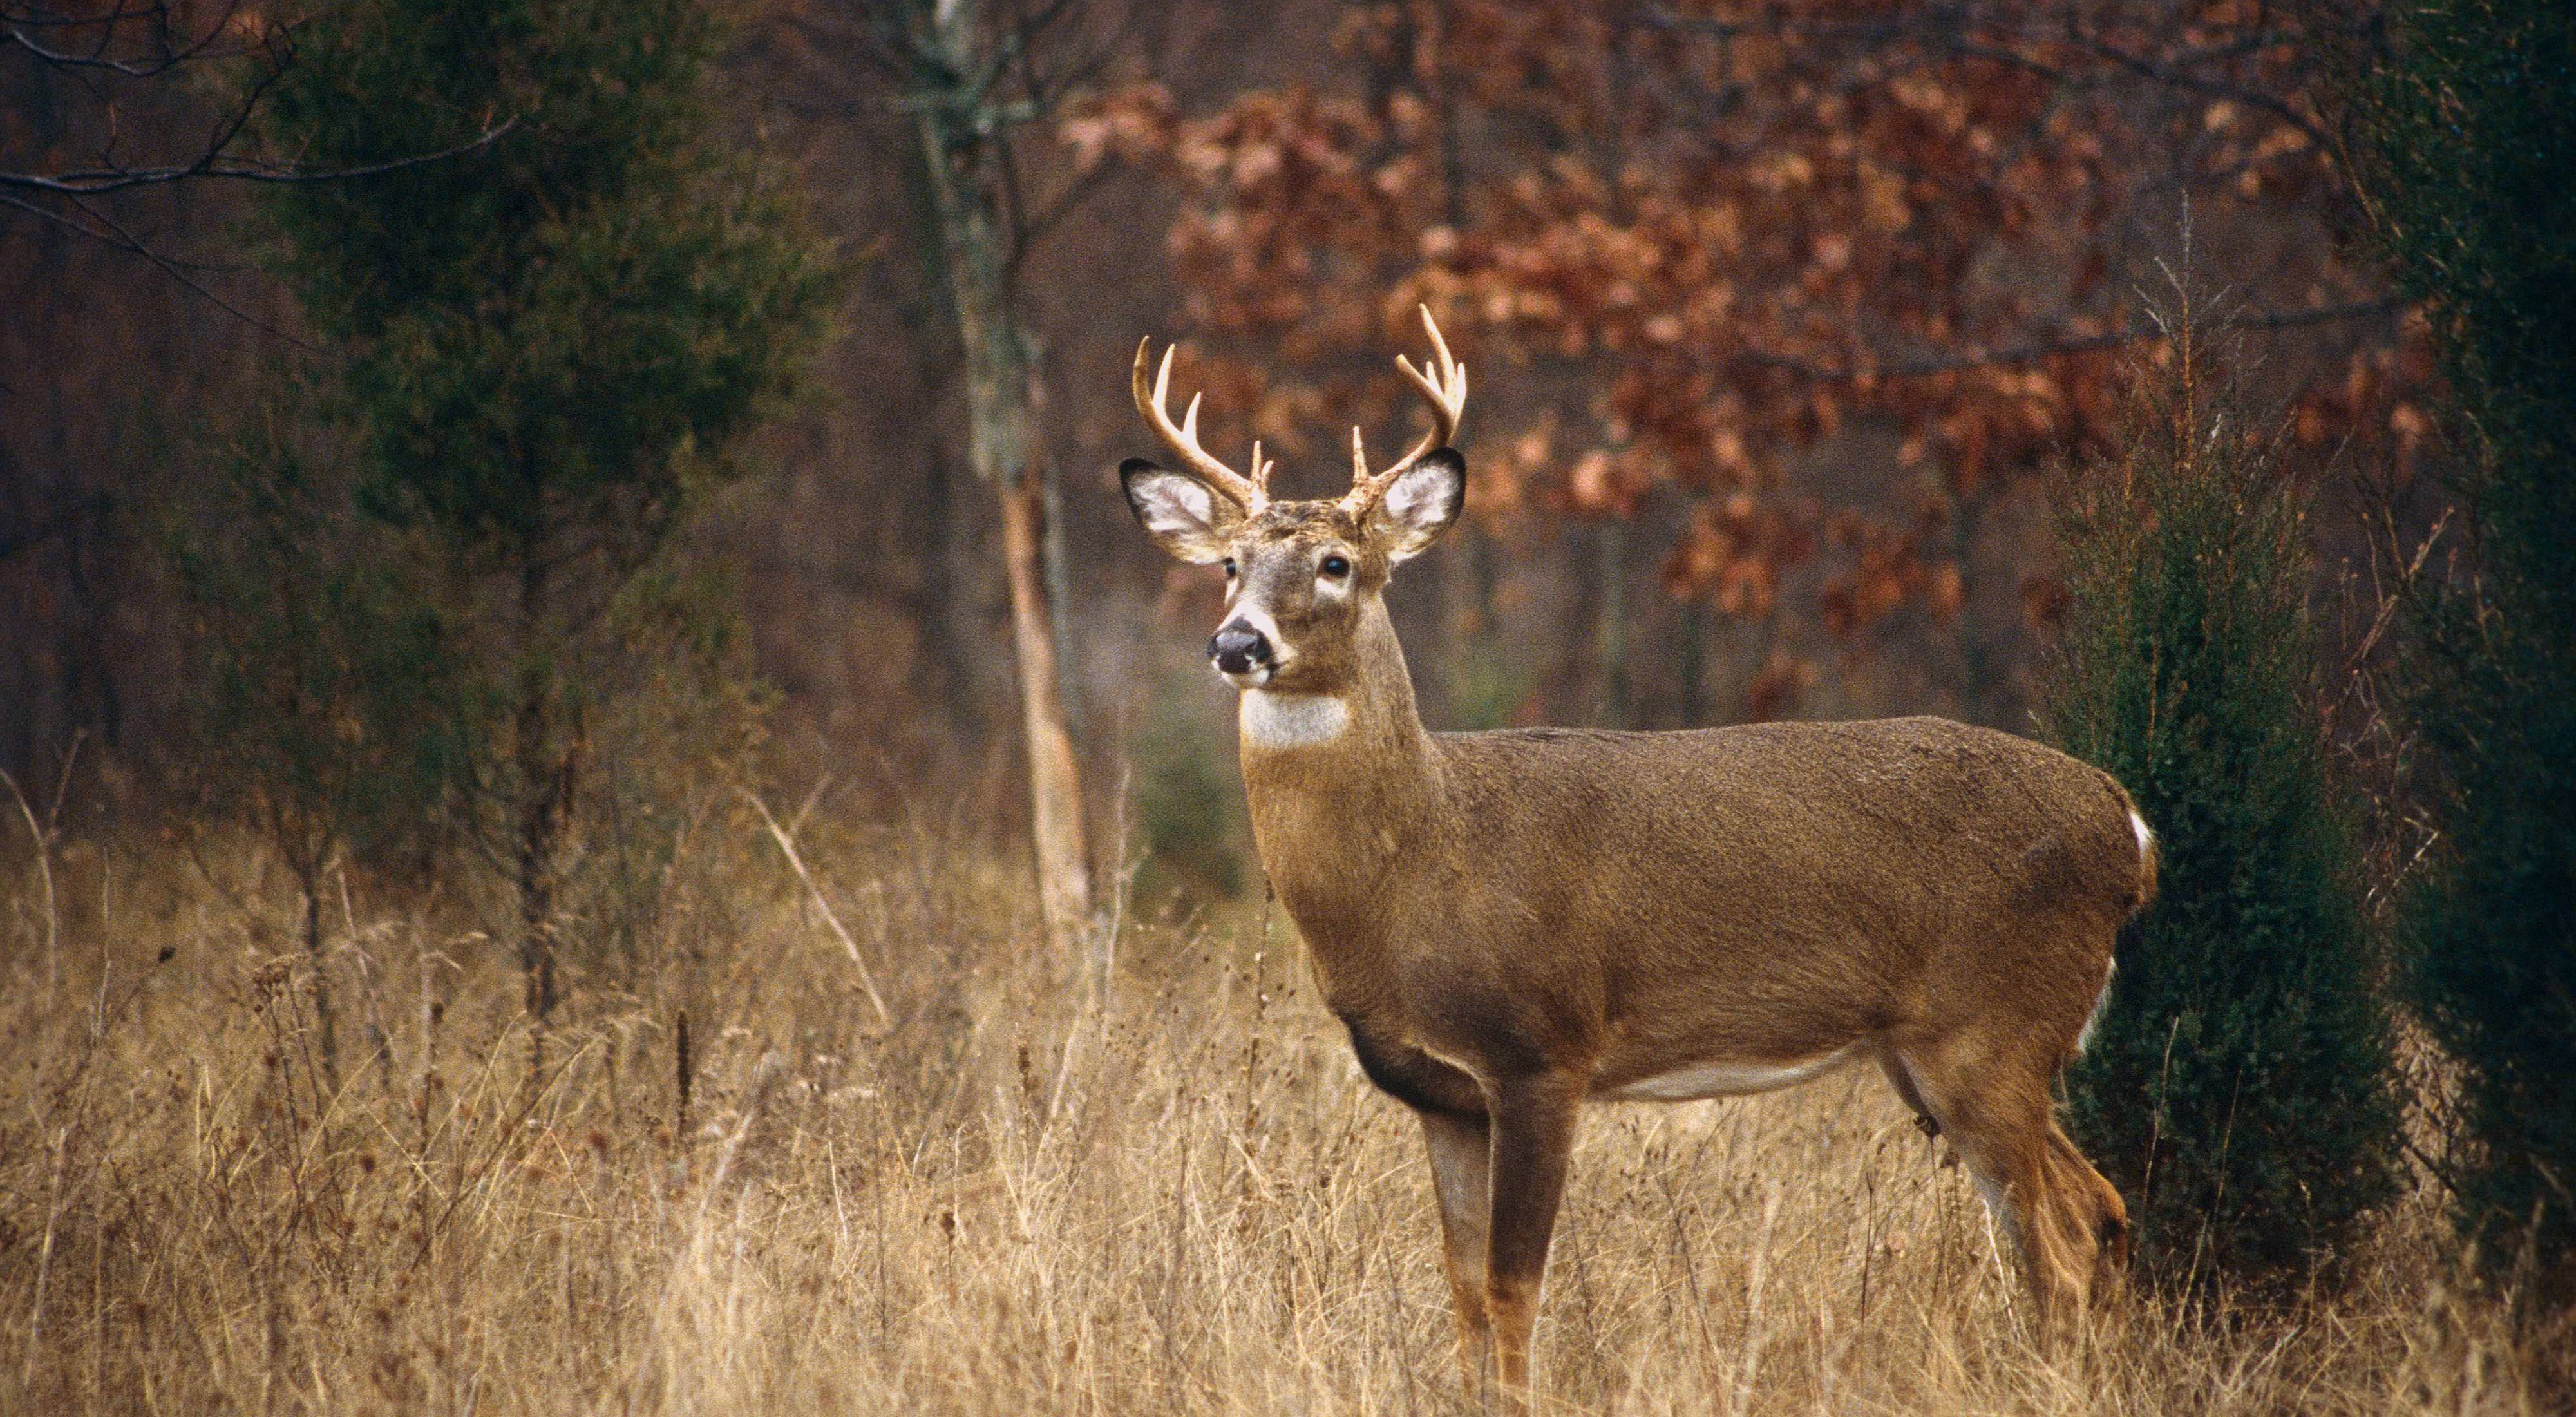 A male deer stands in a forest.